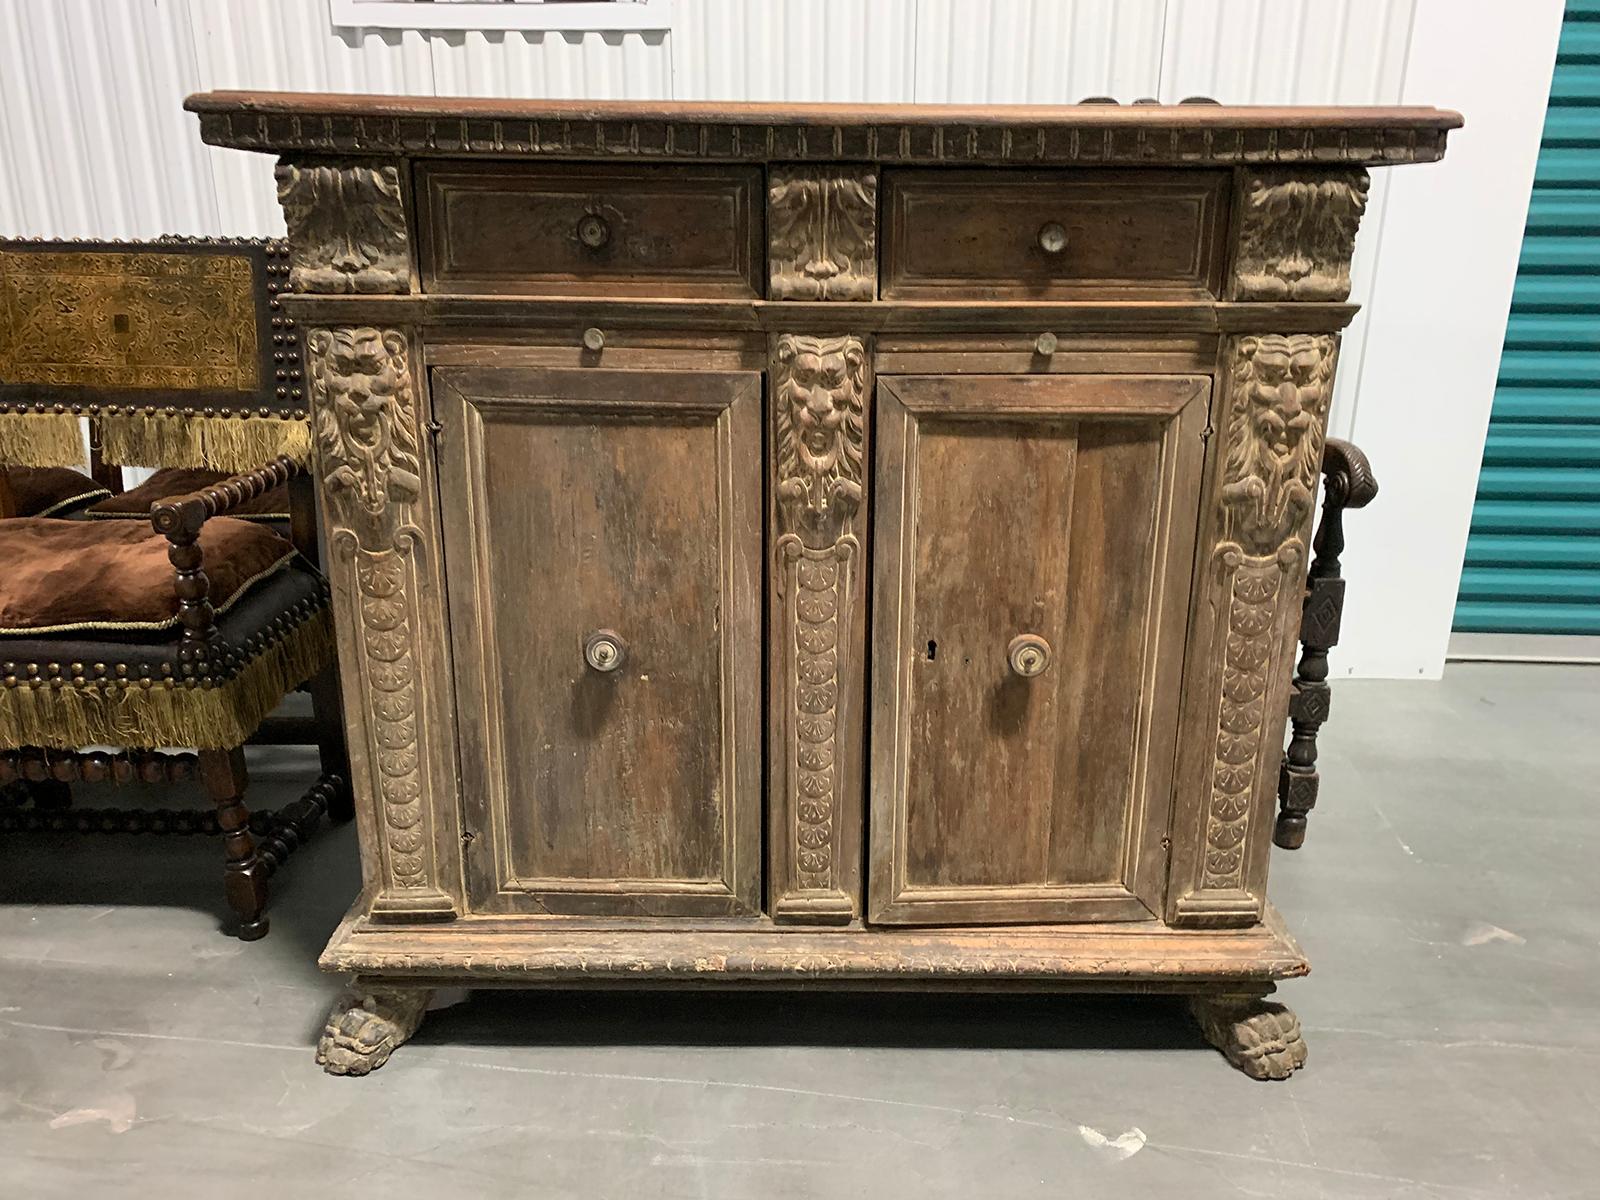 18th century Italian finely-carved credenza, two drawers, two slides two doors
two shelves on the inside.